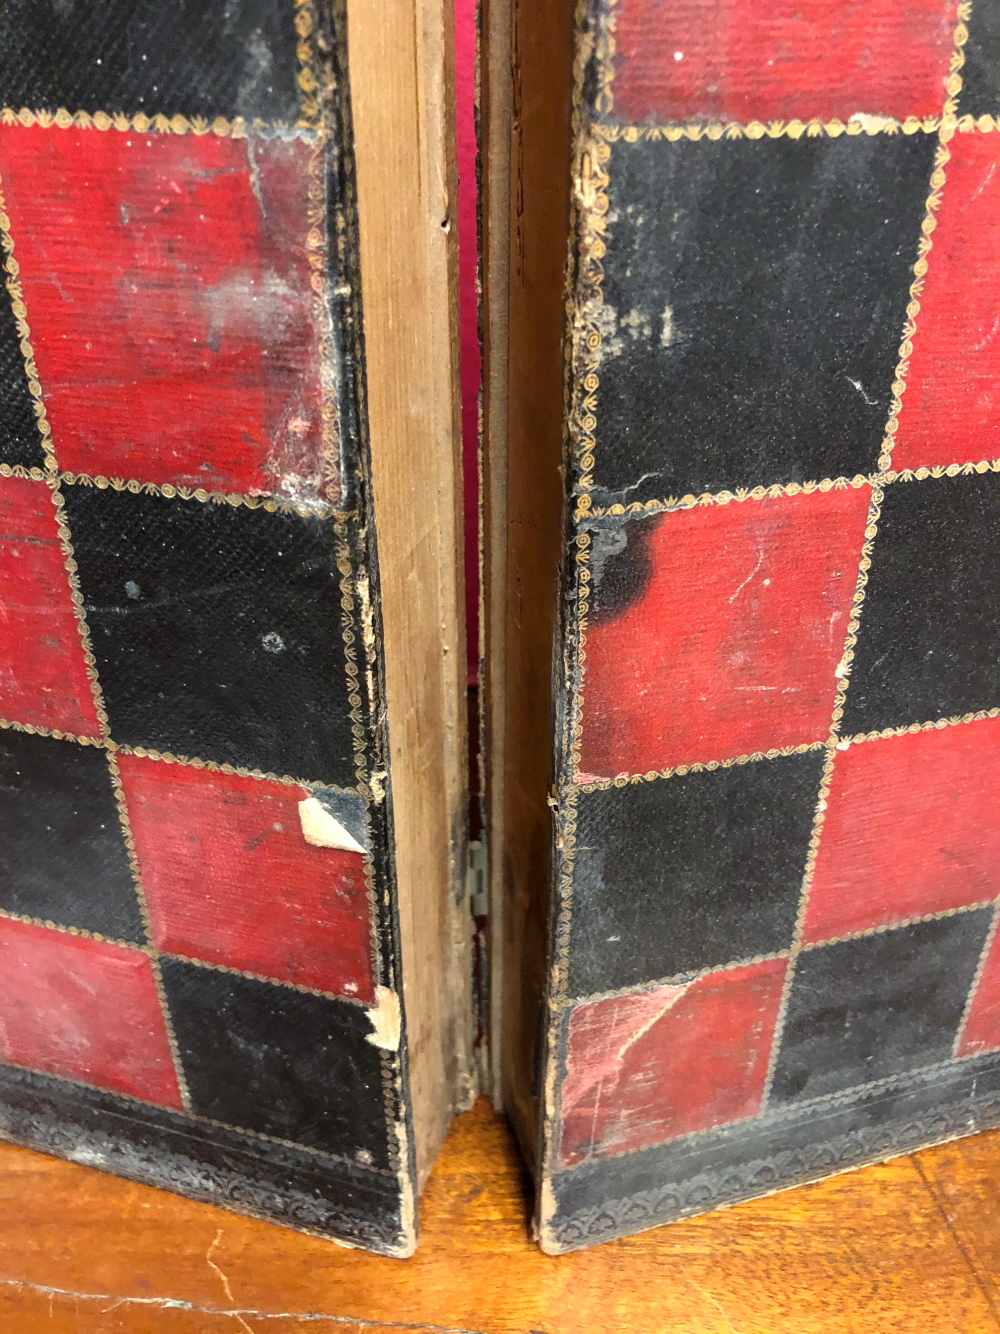 A RED, BLACK AND GILT LEATHER MOUNTED CHESS BOARD DISGUISED AS TWO VOLUMES ON THE HISTORY OF ENGLAND - Image 10 of 11